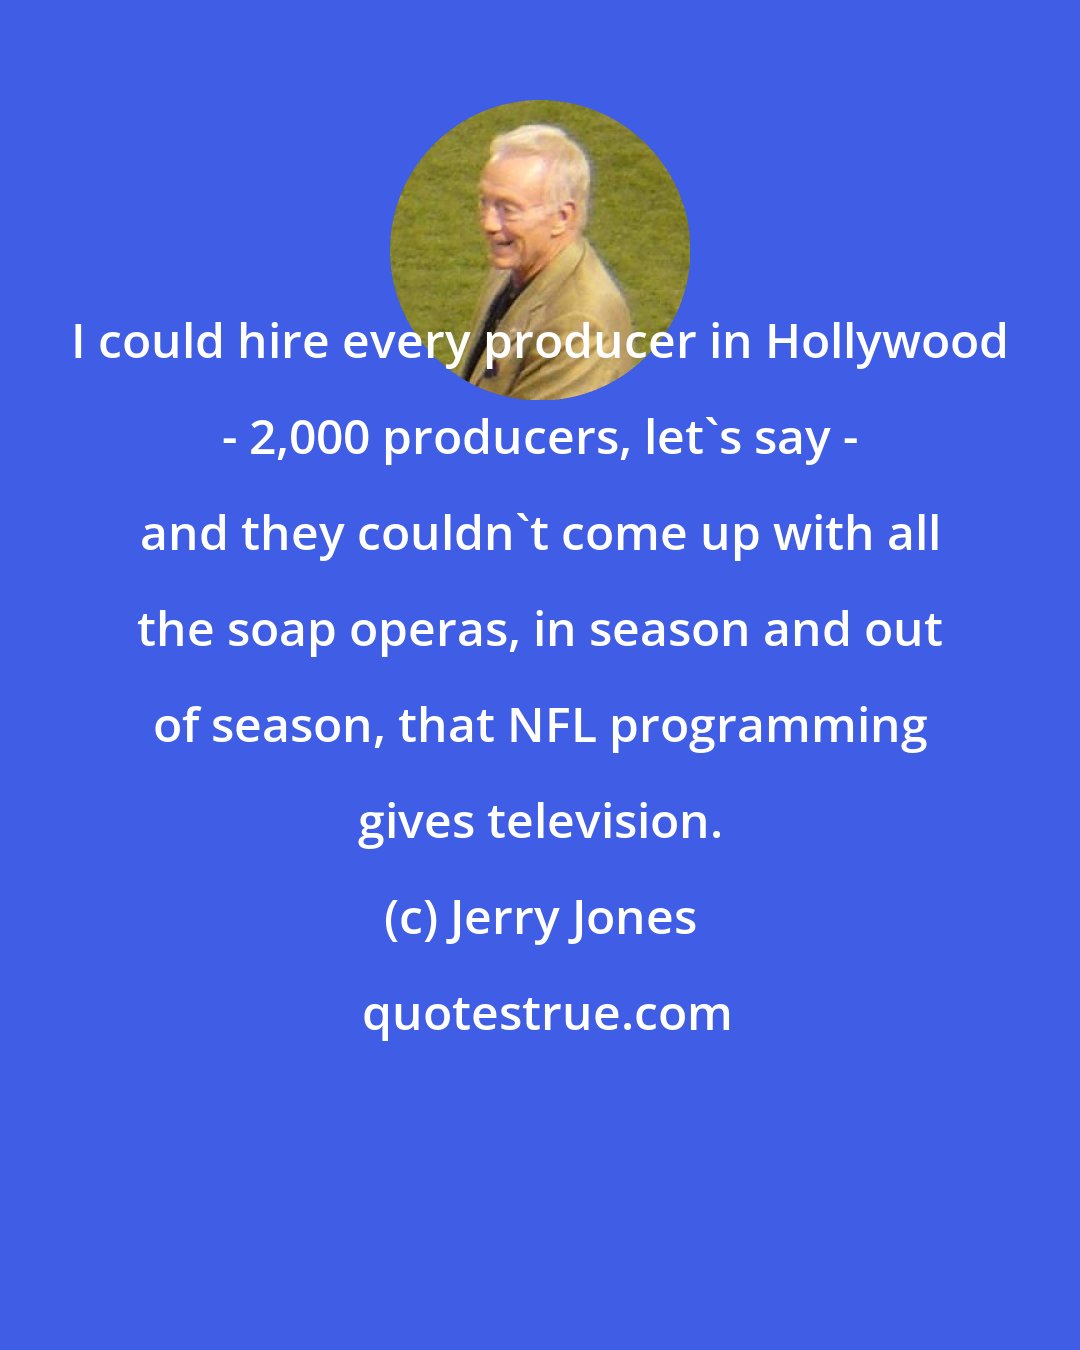 Jerry Jones: I could hire every producer in Hollywood - 2,000 producers, let's say - and they couldn't come up with all the soap operas, in season and out of season, that NFL programming gives television.